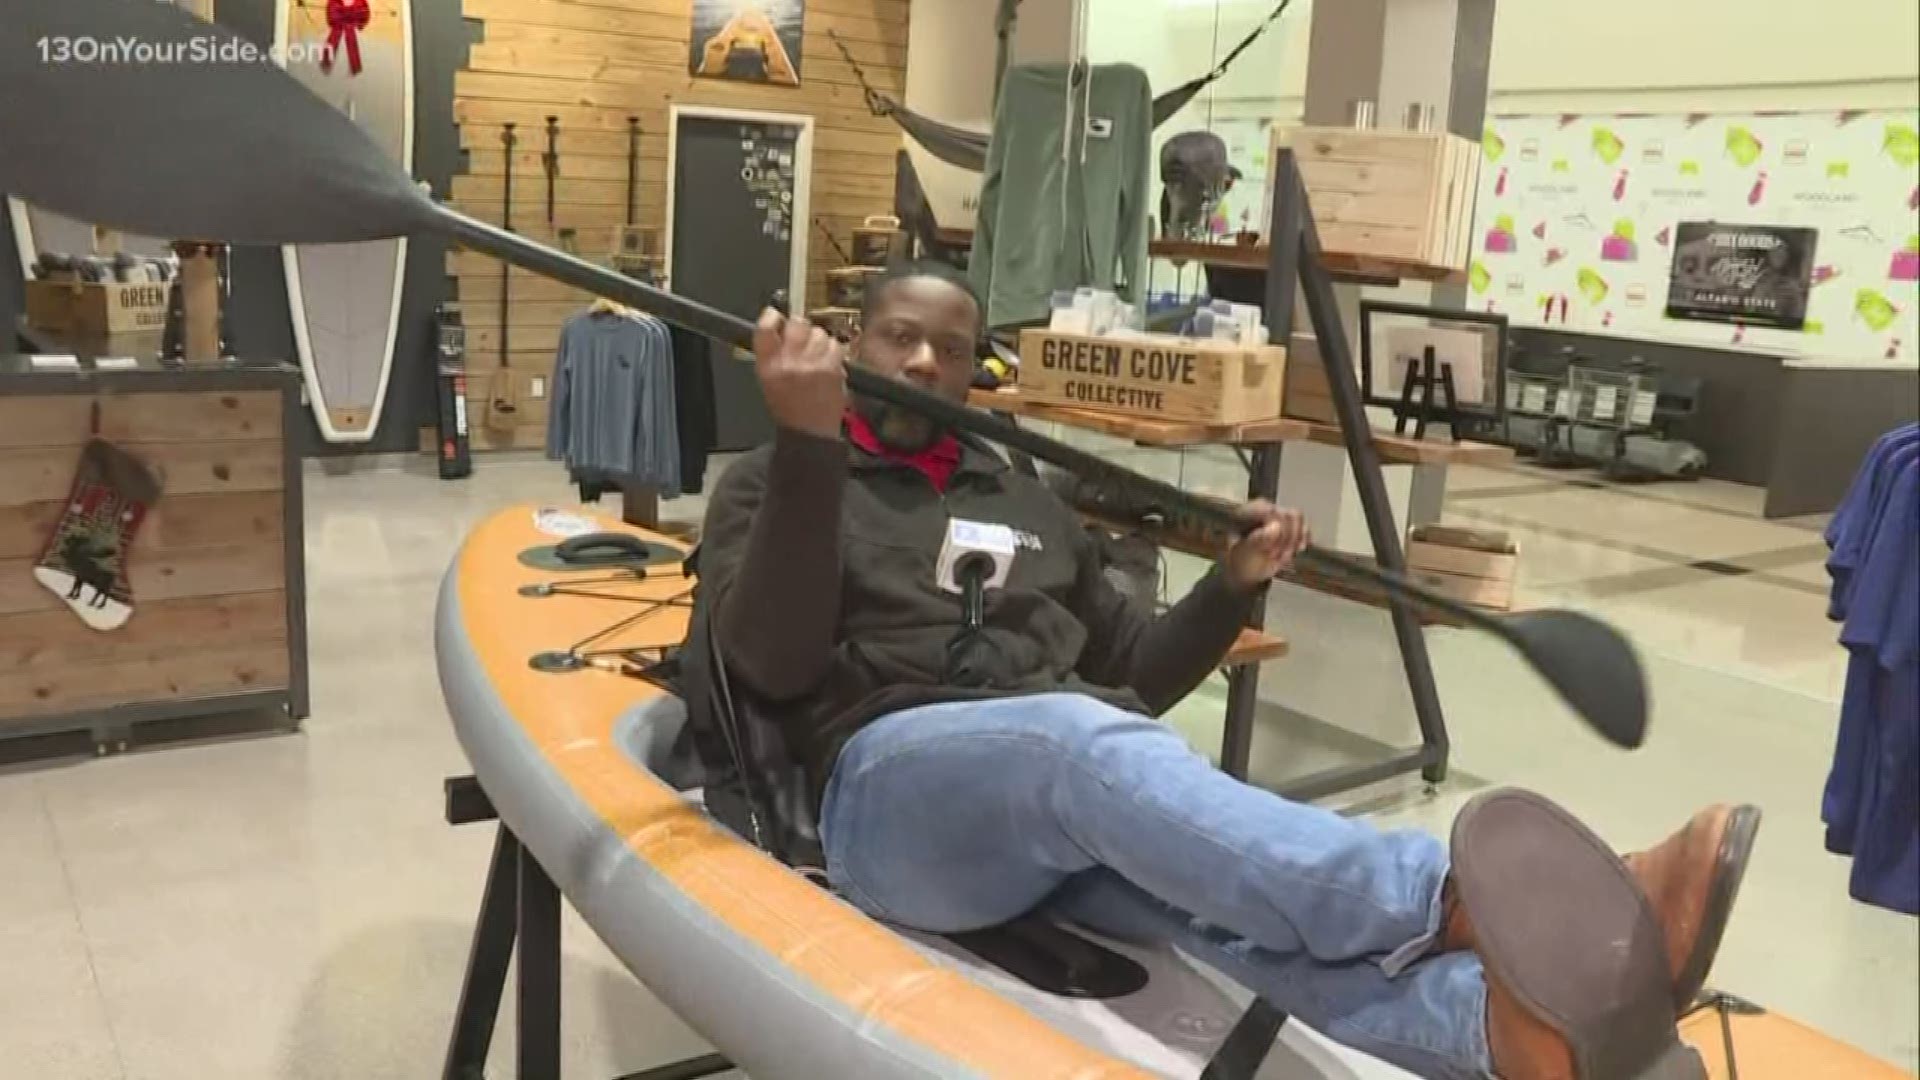 13 ON YOUR SIDE's James Starks spent the morning at Woodland Mall checking out all the Black Friday deals and kicking back in a canoe.